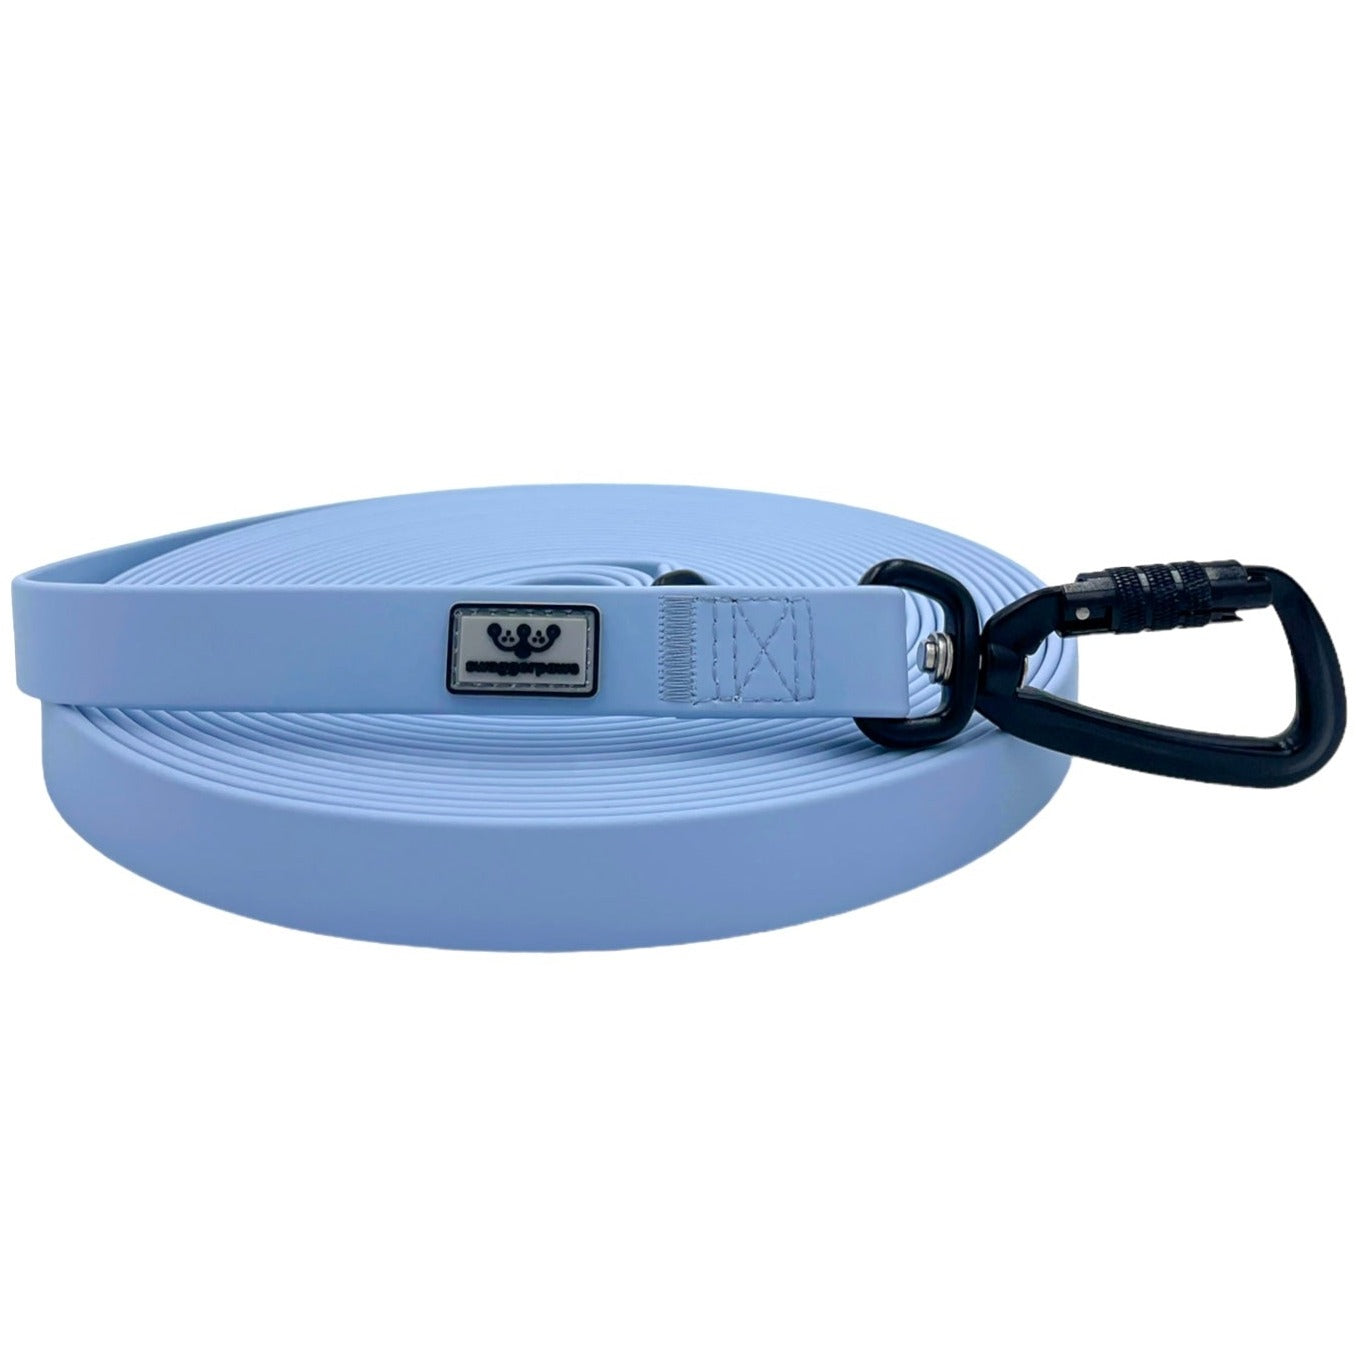 SwaggerPaws waterproof long line dog lead with auto-lock carabiner, sky blue. 